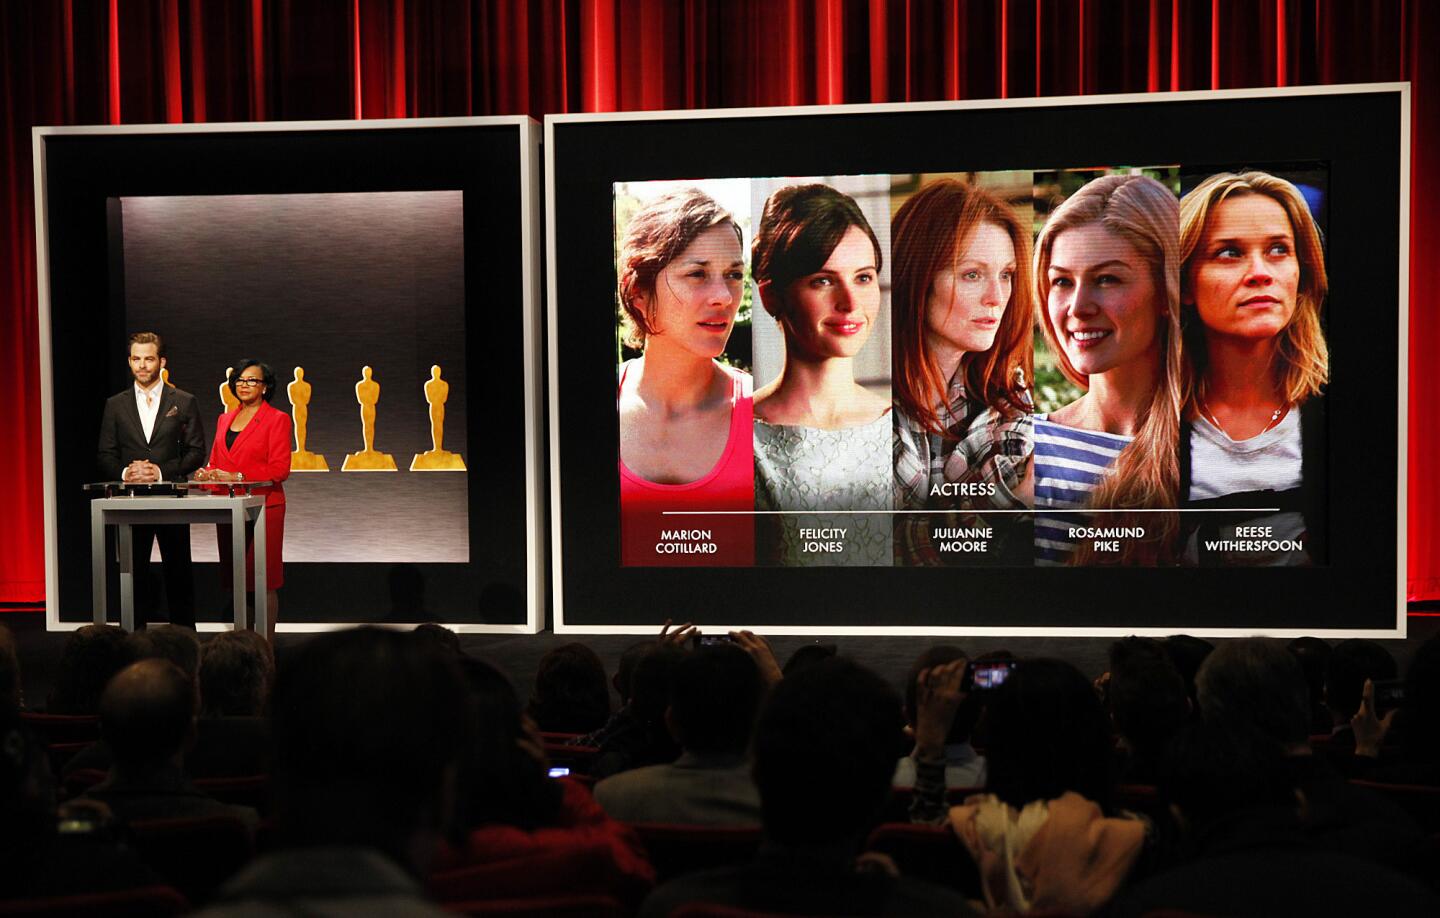 Lead actress nominees are shown as Chris Pine and Academy President Cheryl Boone Isaacs announce the nominations.